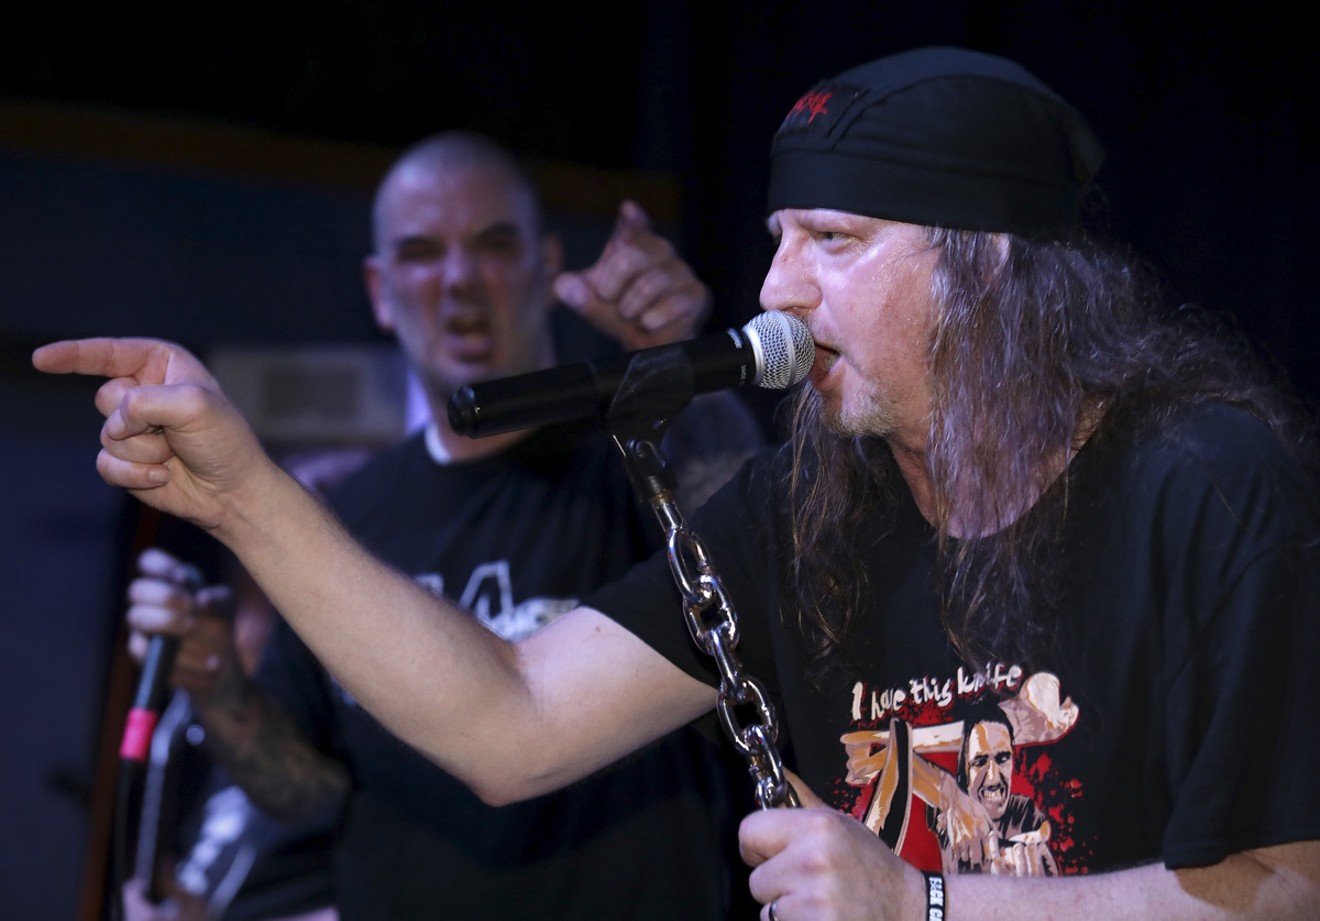 Bruce Corbitt is able to sing a couple of verses with encouragement from ex-Pantera frontman Philip Anselmo.